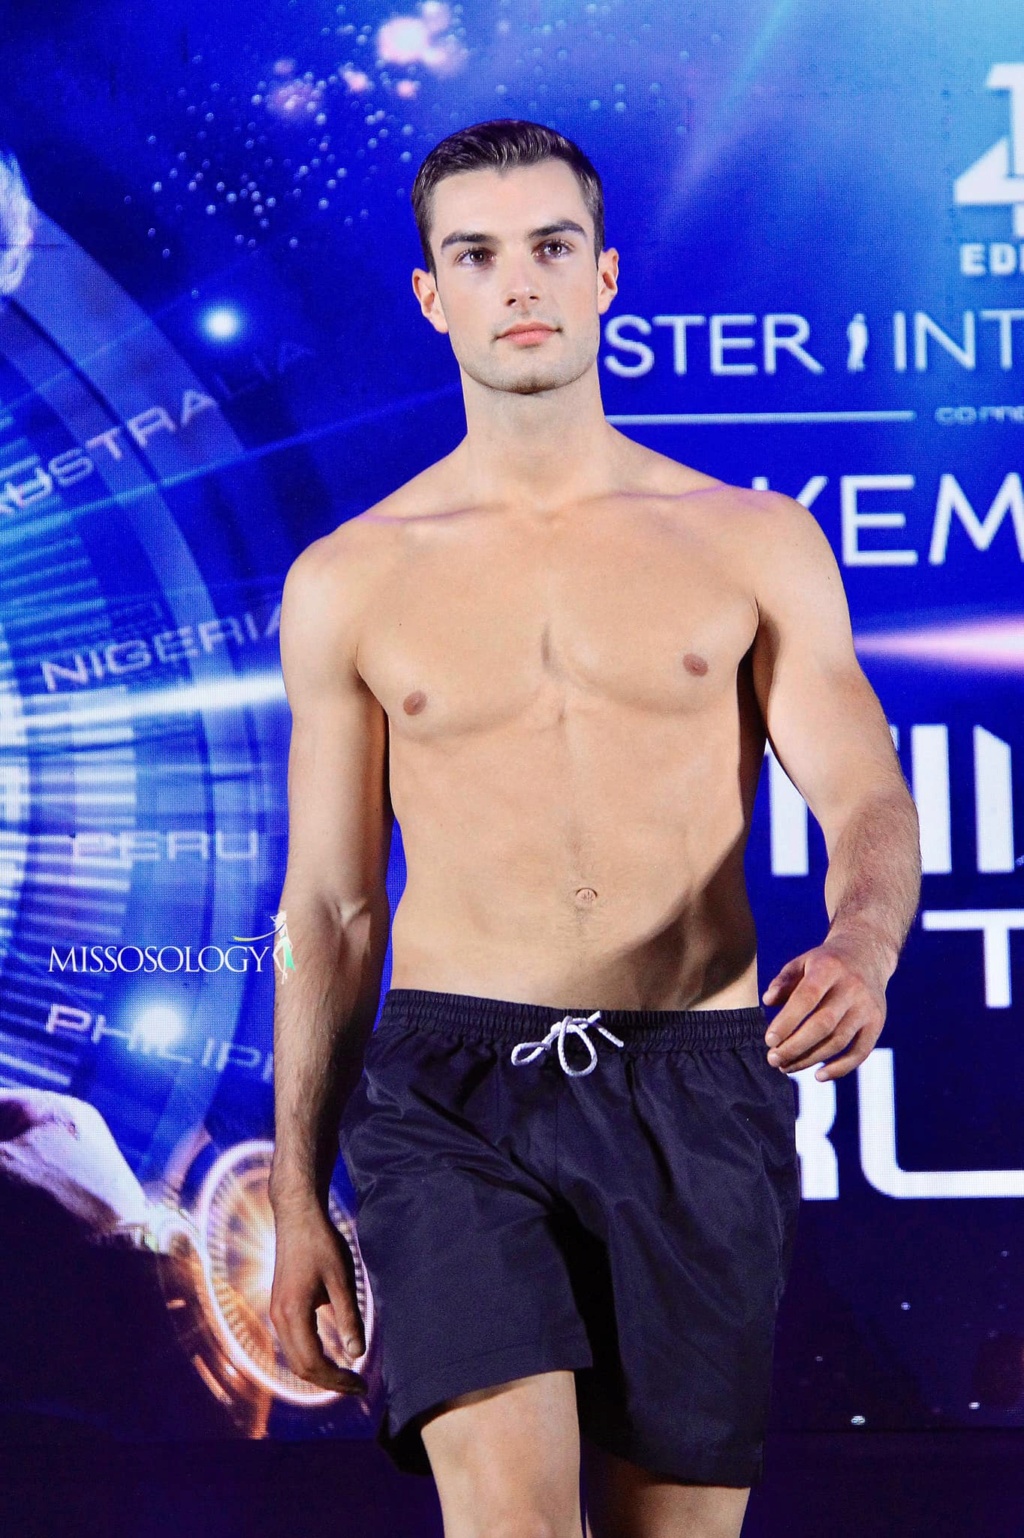 14th Mister International in Manila, Philippines - Oct 30th, 2022 - Winner is Dominican Republic 31284711